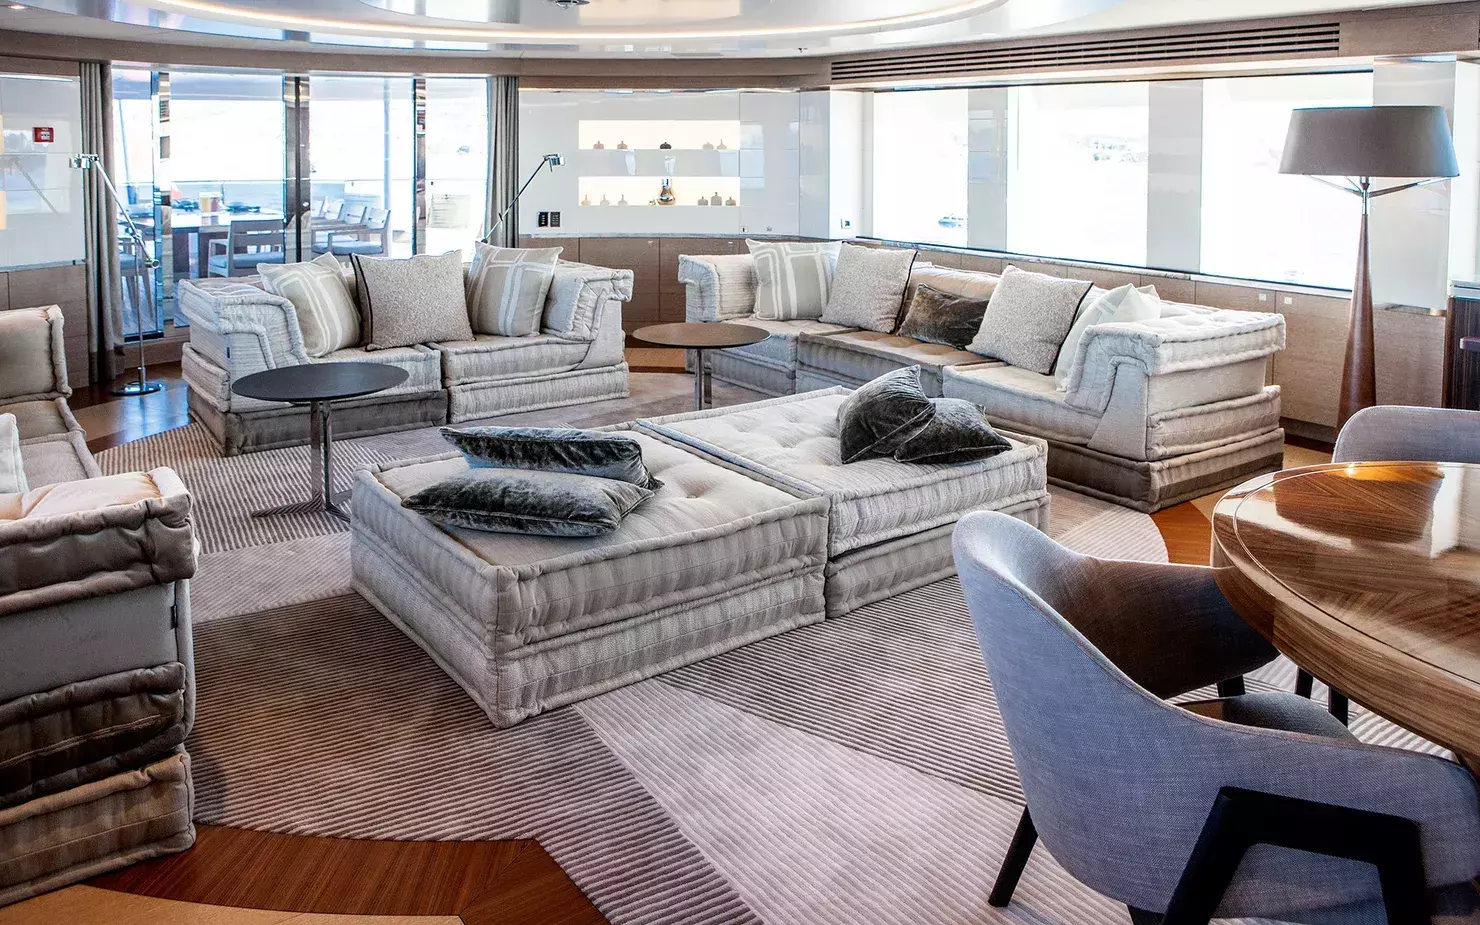 Asya by Heesen - Top rates for a Rental of a private Superyacht in France